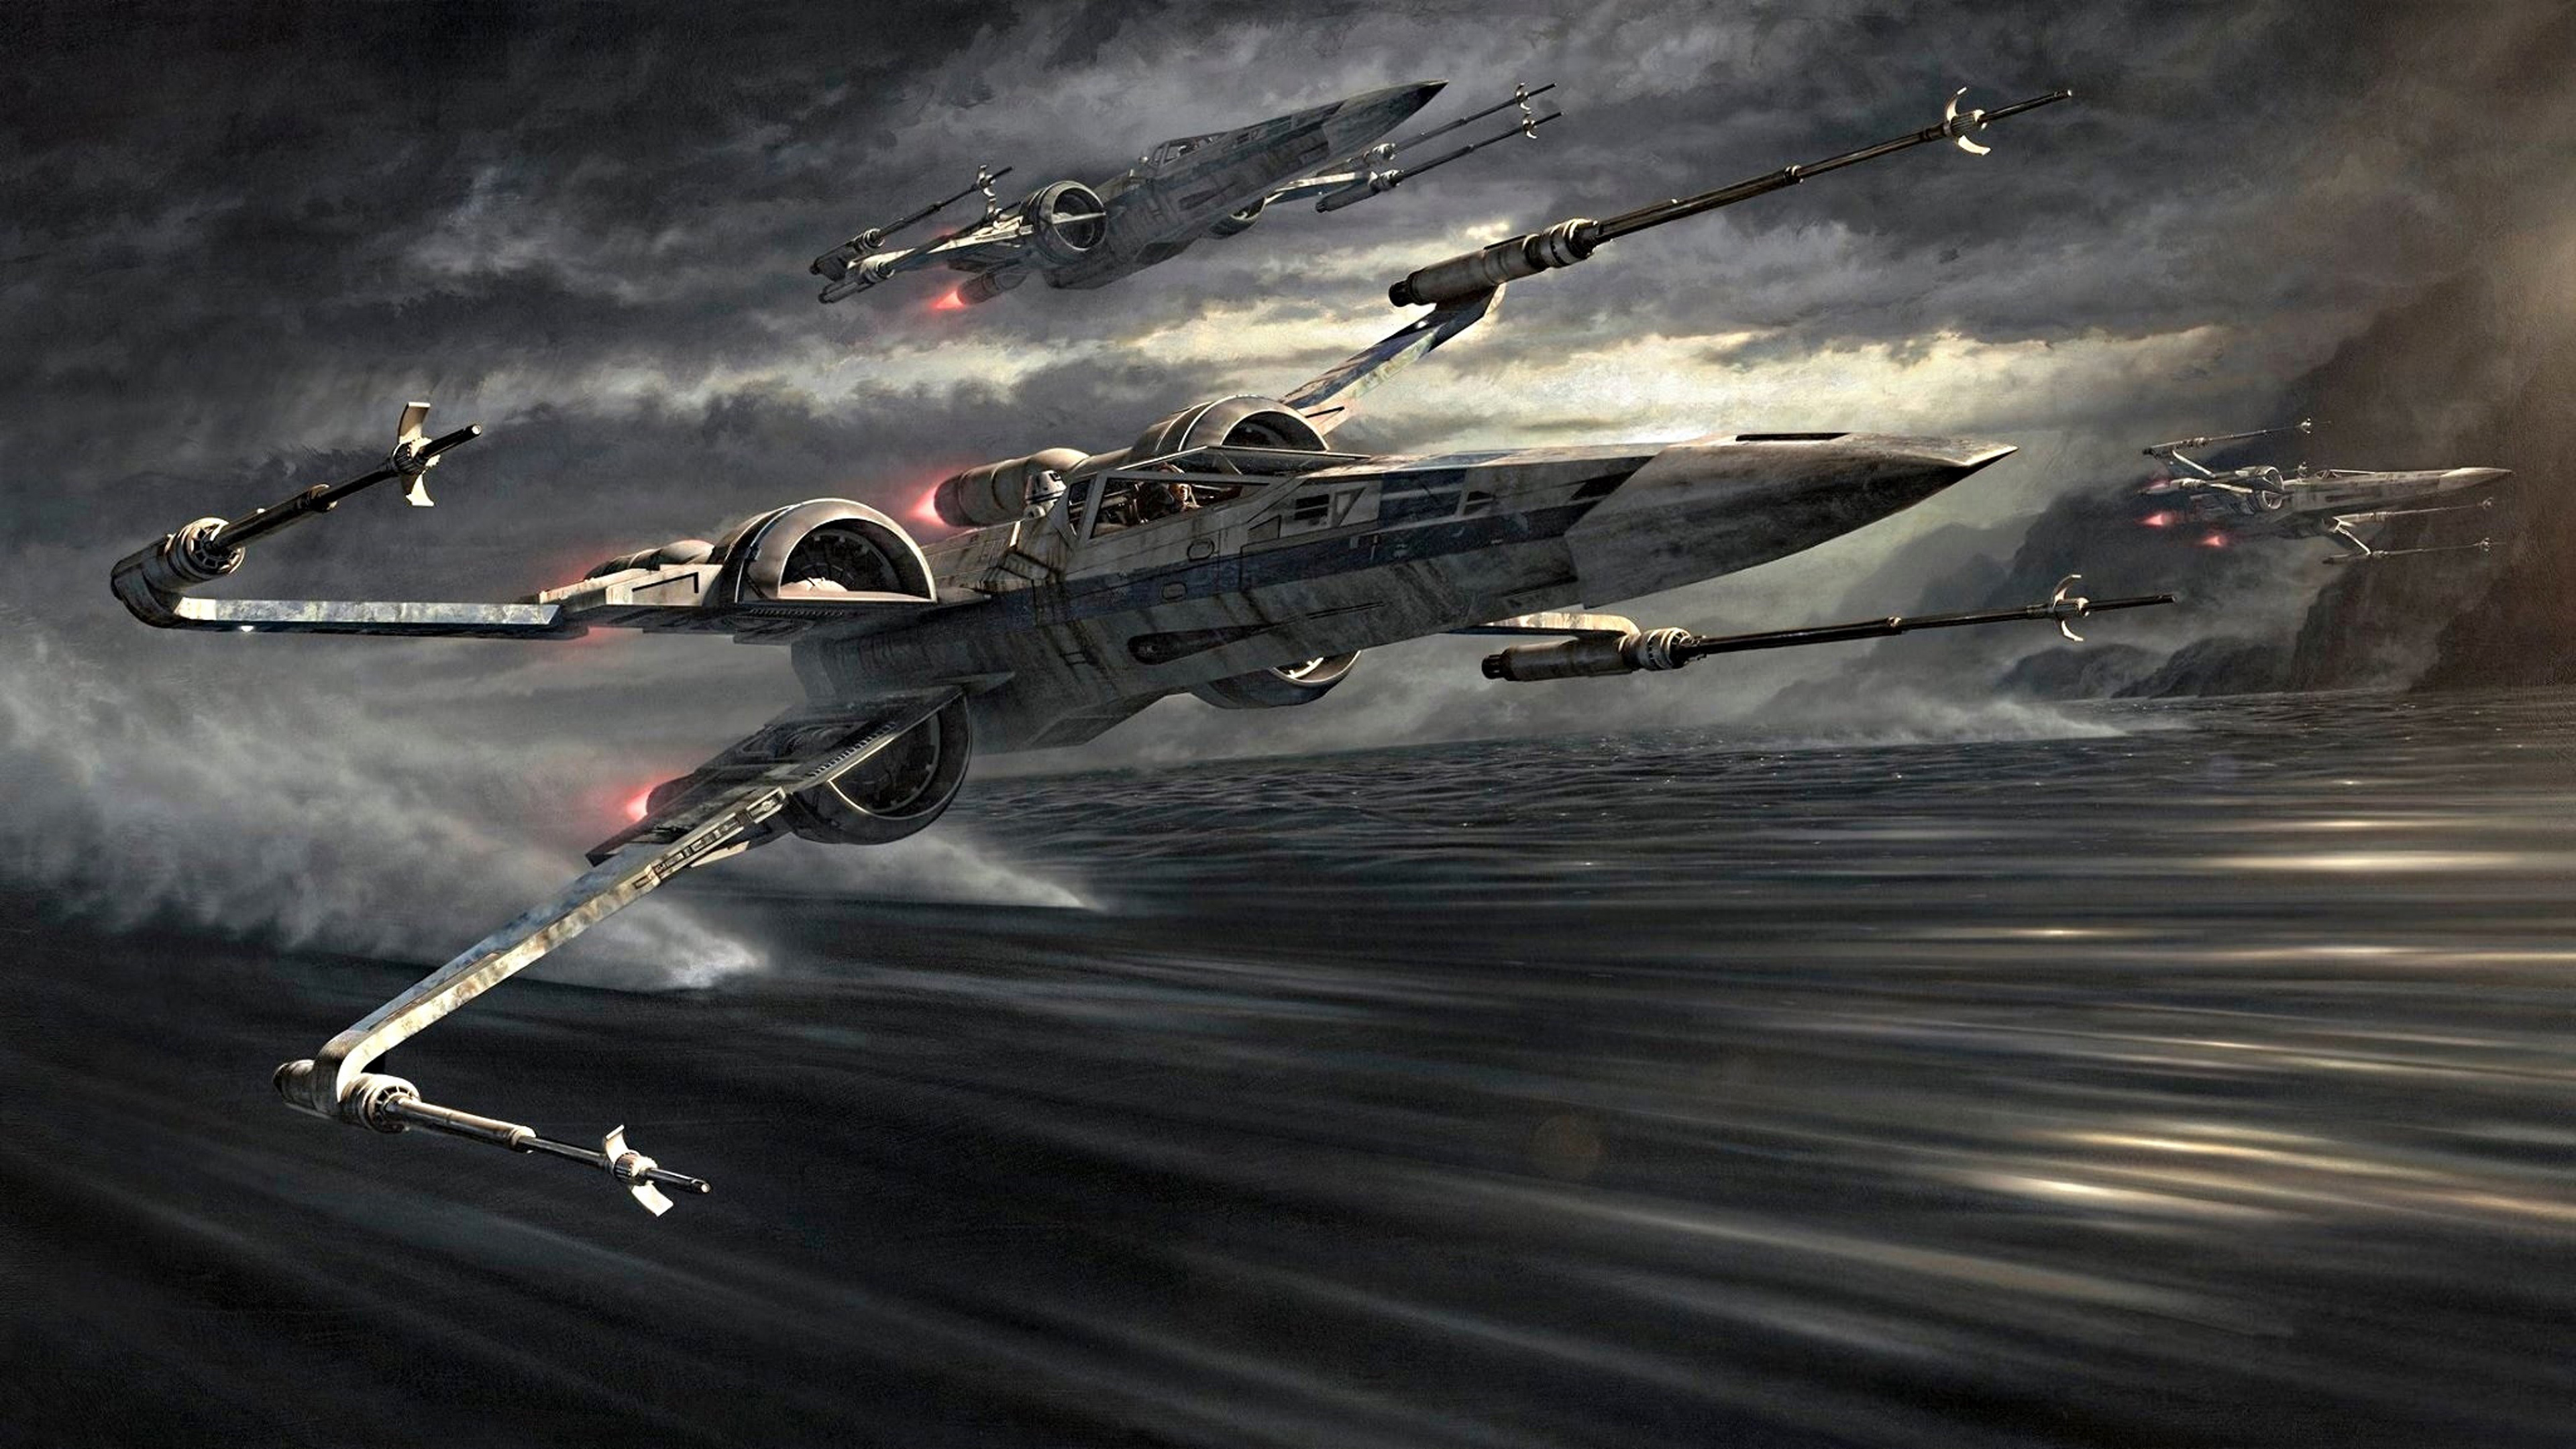 star wars ships wallpaper, aircraft, airplane, vehicle, military aircraft, air force, aircraft carrier, space, ground attack aircraft, rocket powered aircraft, strategy video game